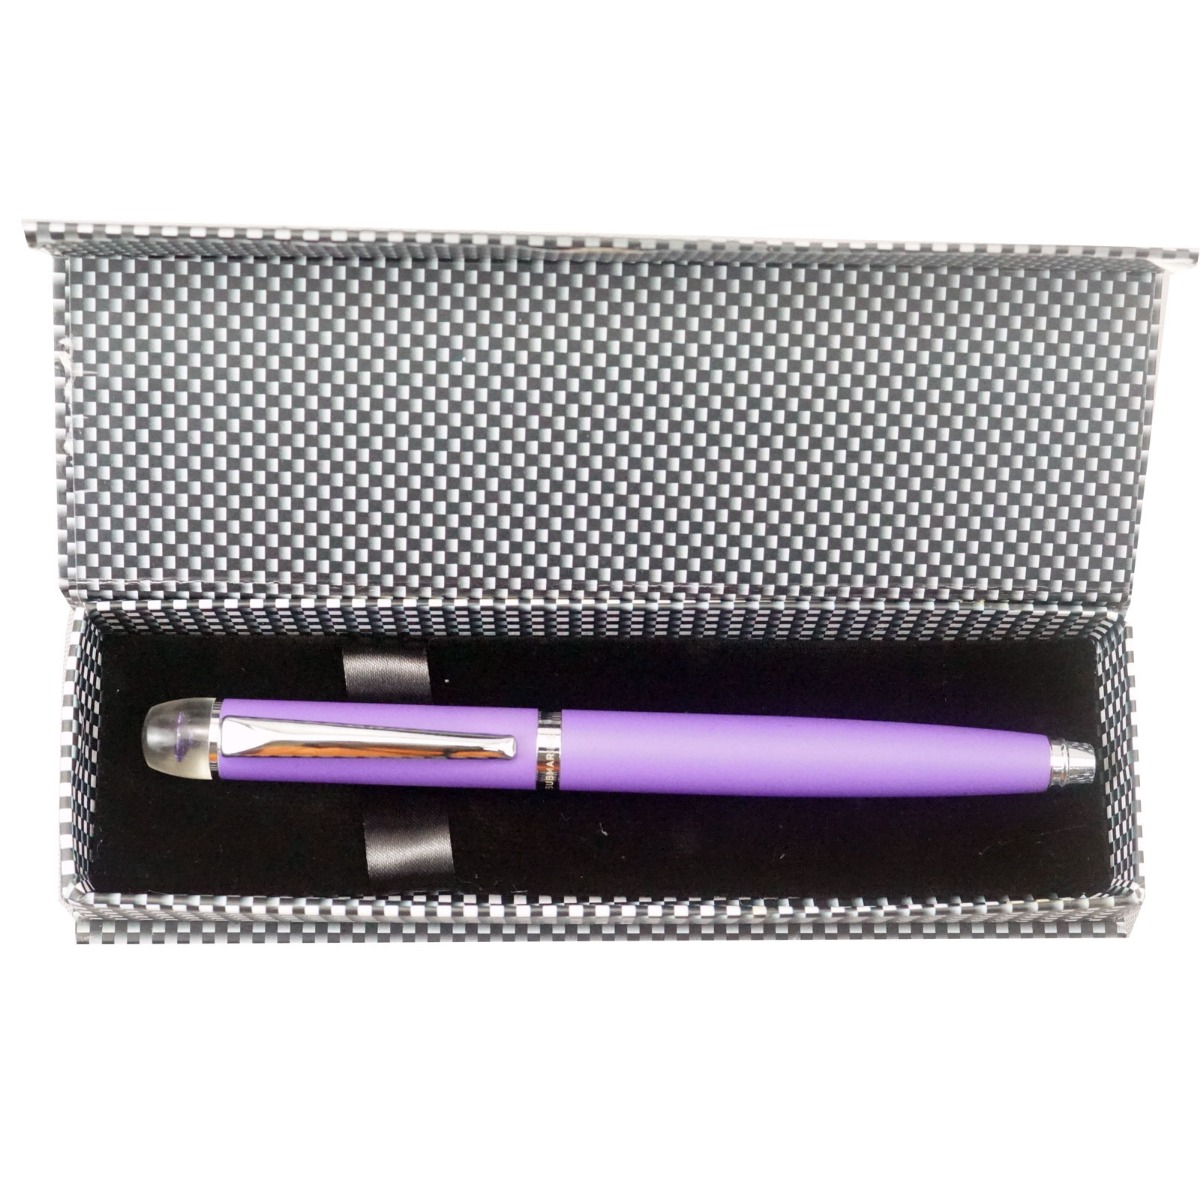 Submarine 1056 Model : 17399 Purpule Color Body With Silver Clip  Stone On  Top And Cap Type Roller Ball Pen 